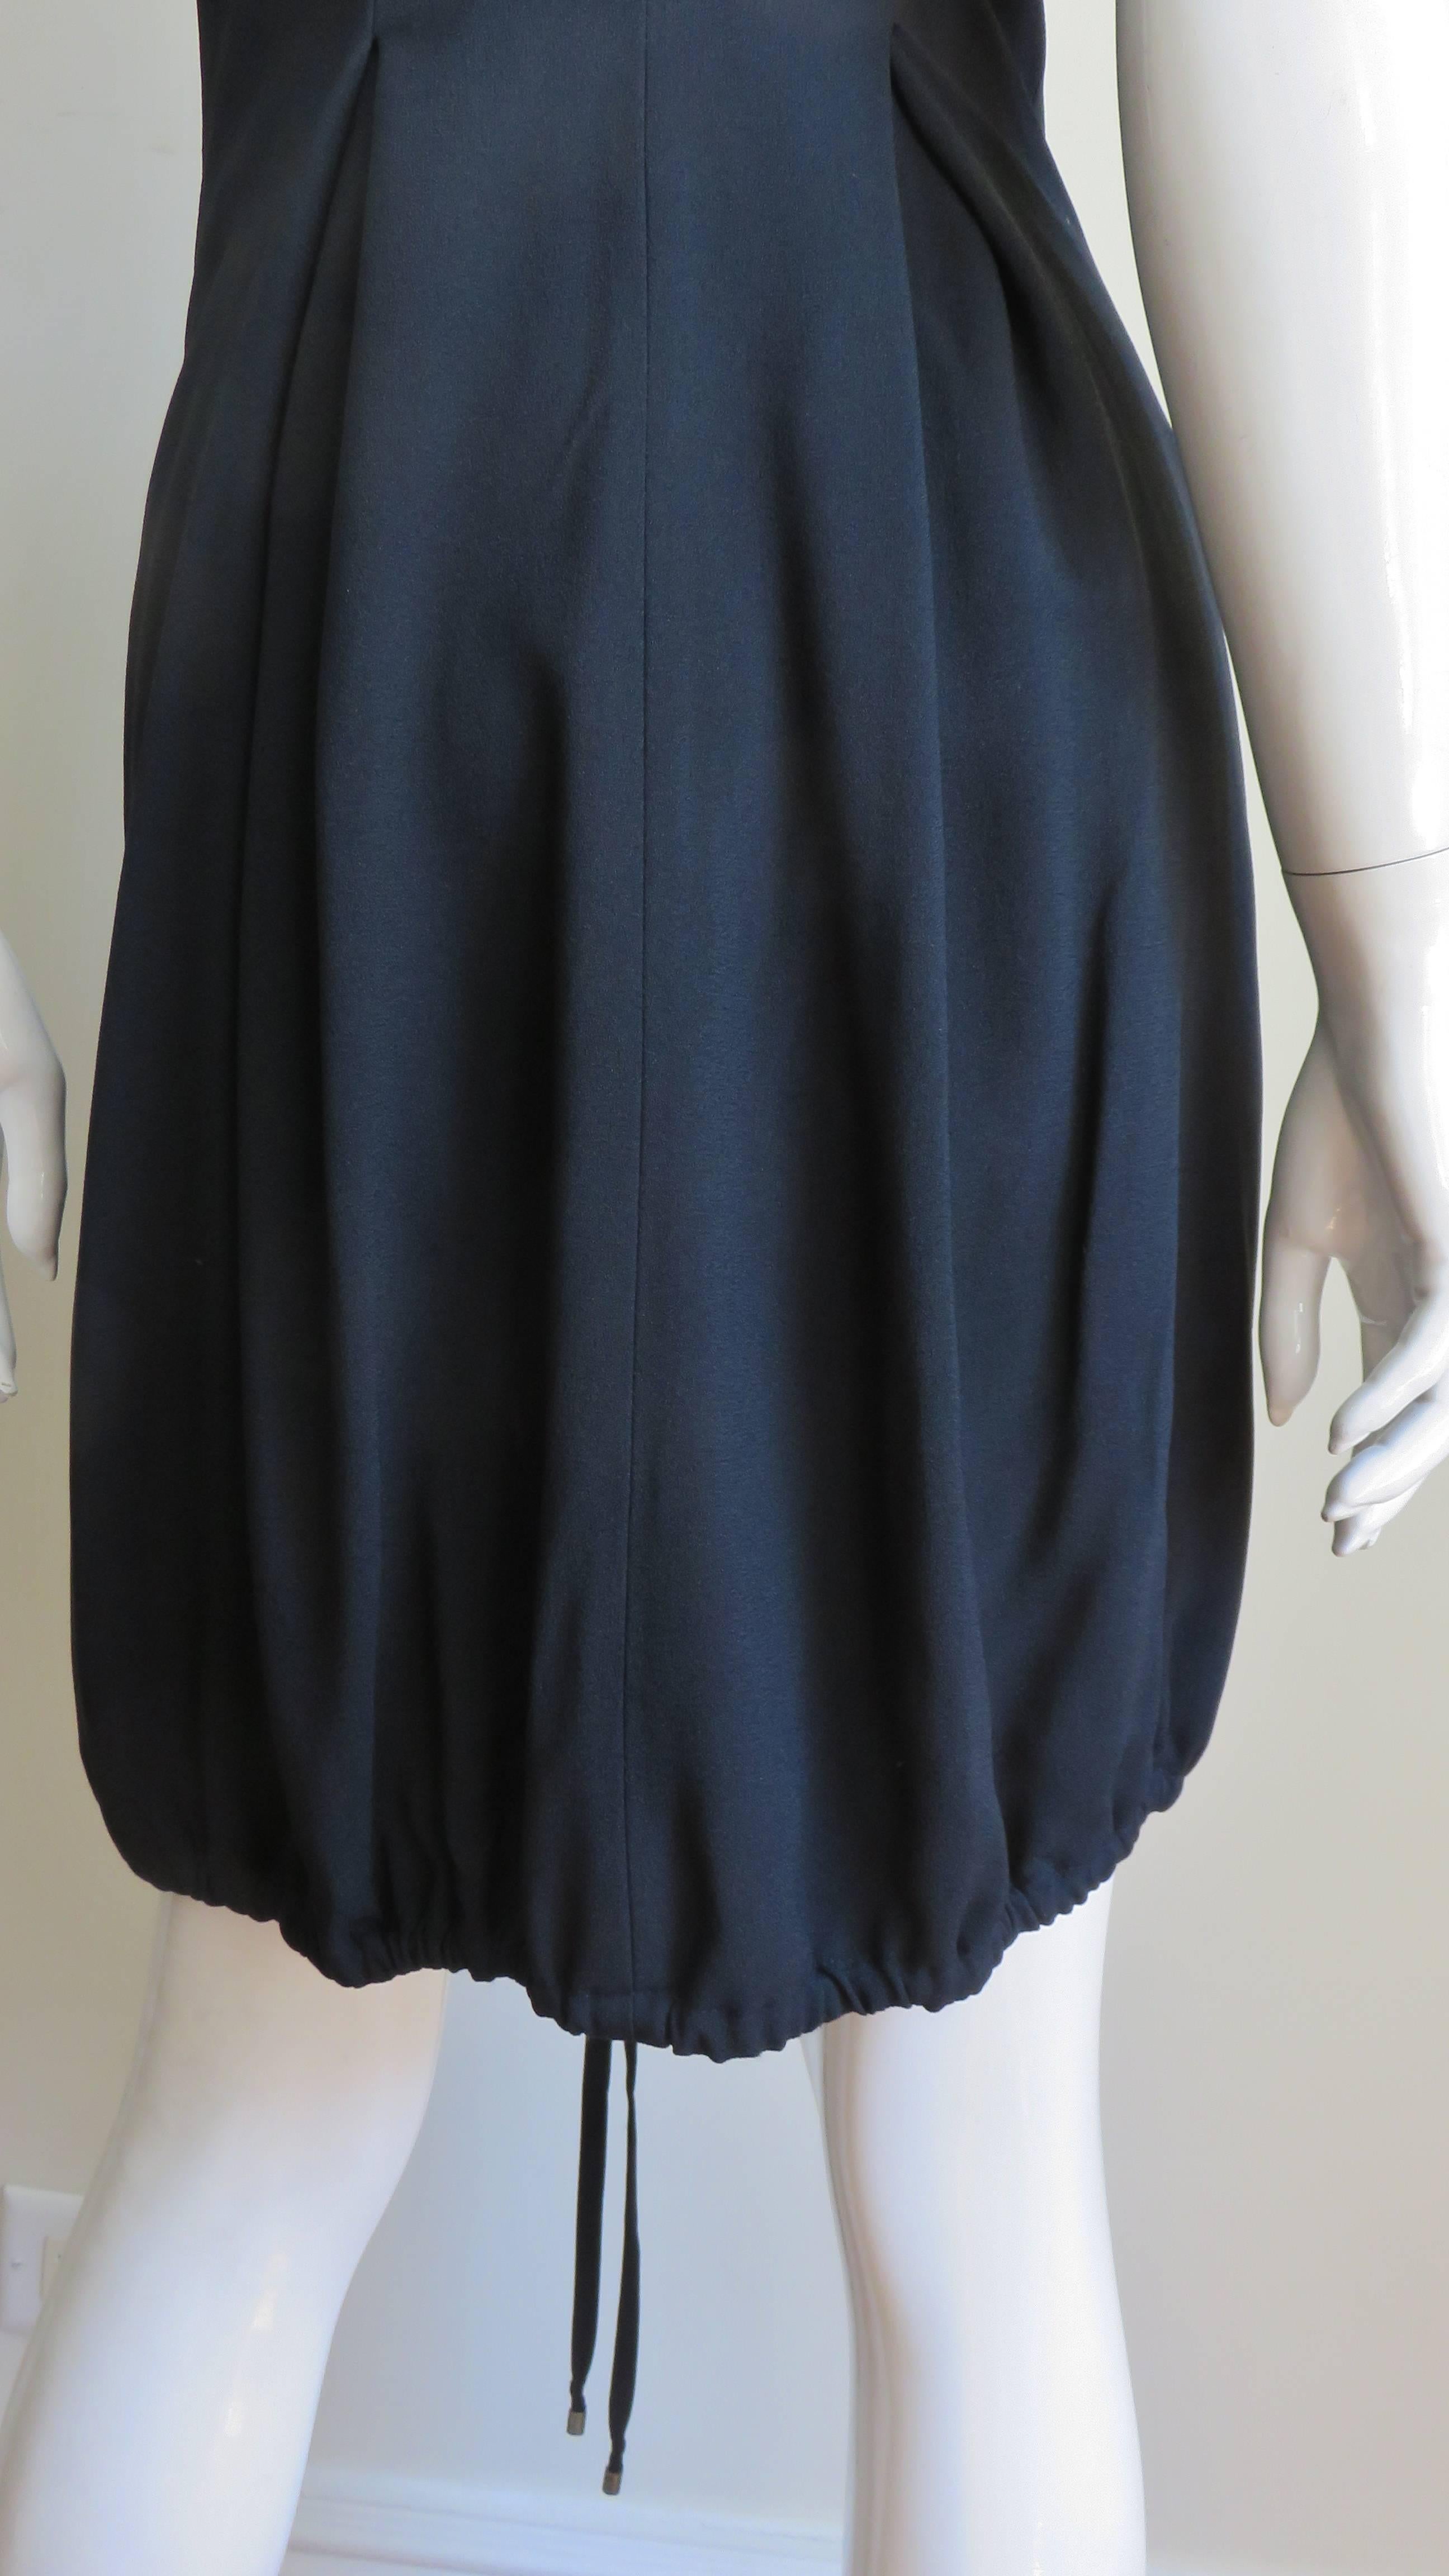 John Galliano for Christian Dior Silk Dress with Buckle Straps For Sale 7